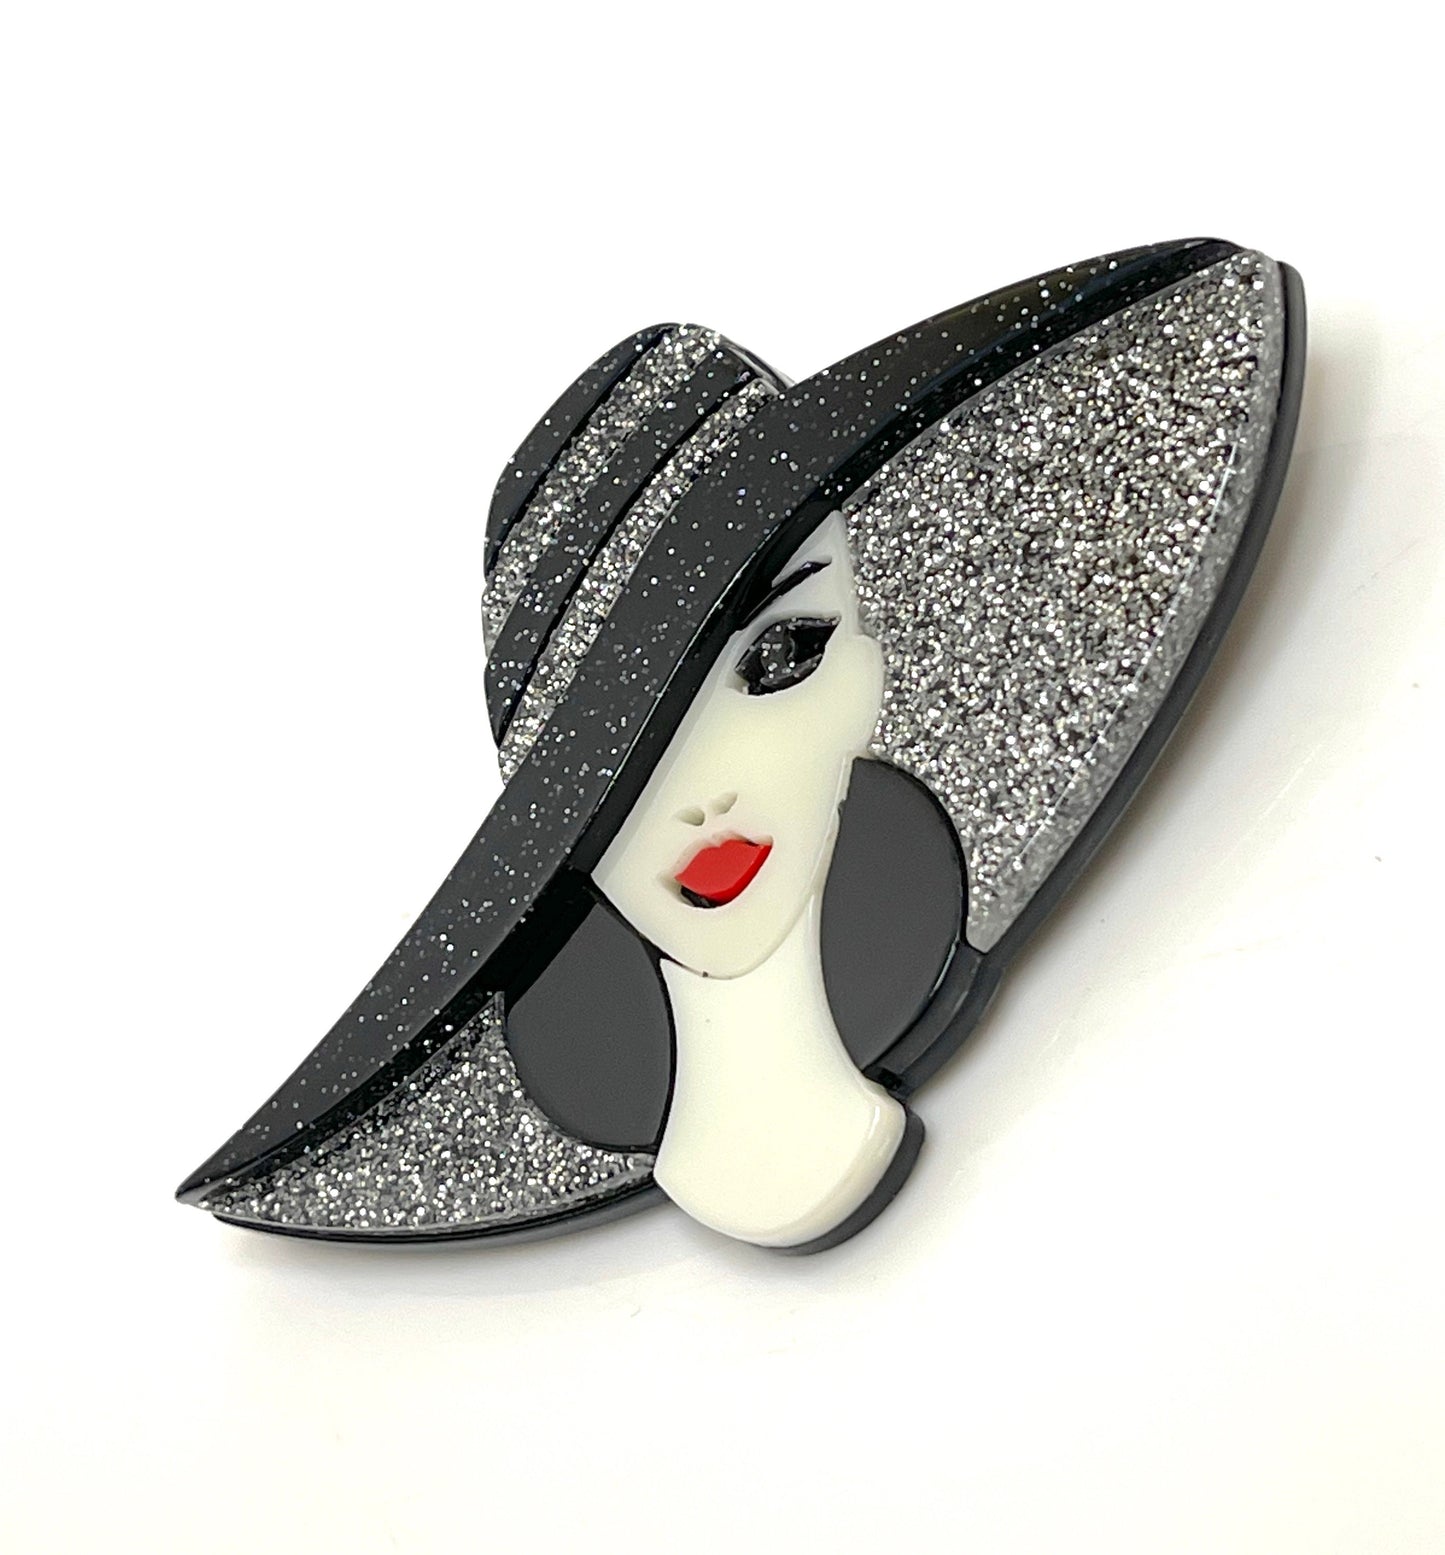 Stylish Lady Very Large Hat Brooch, Glittery Classy Lady Pin, Fashion Pin for Jacket Scarf, Head and Shoulders Lady Pin, Brooches For Women